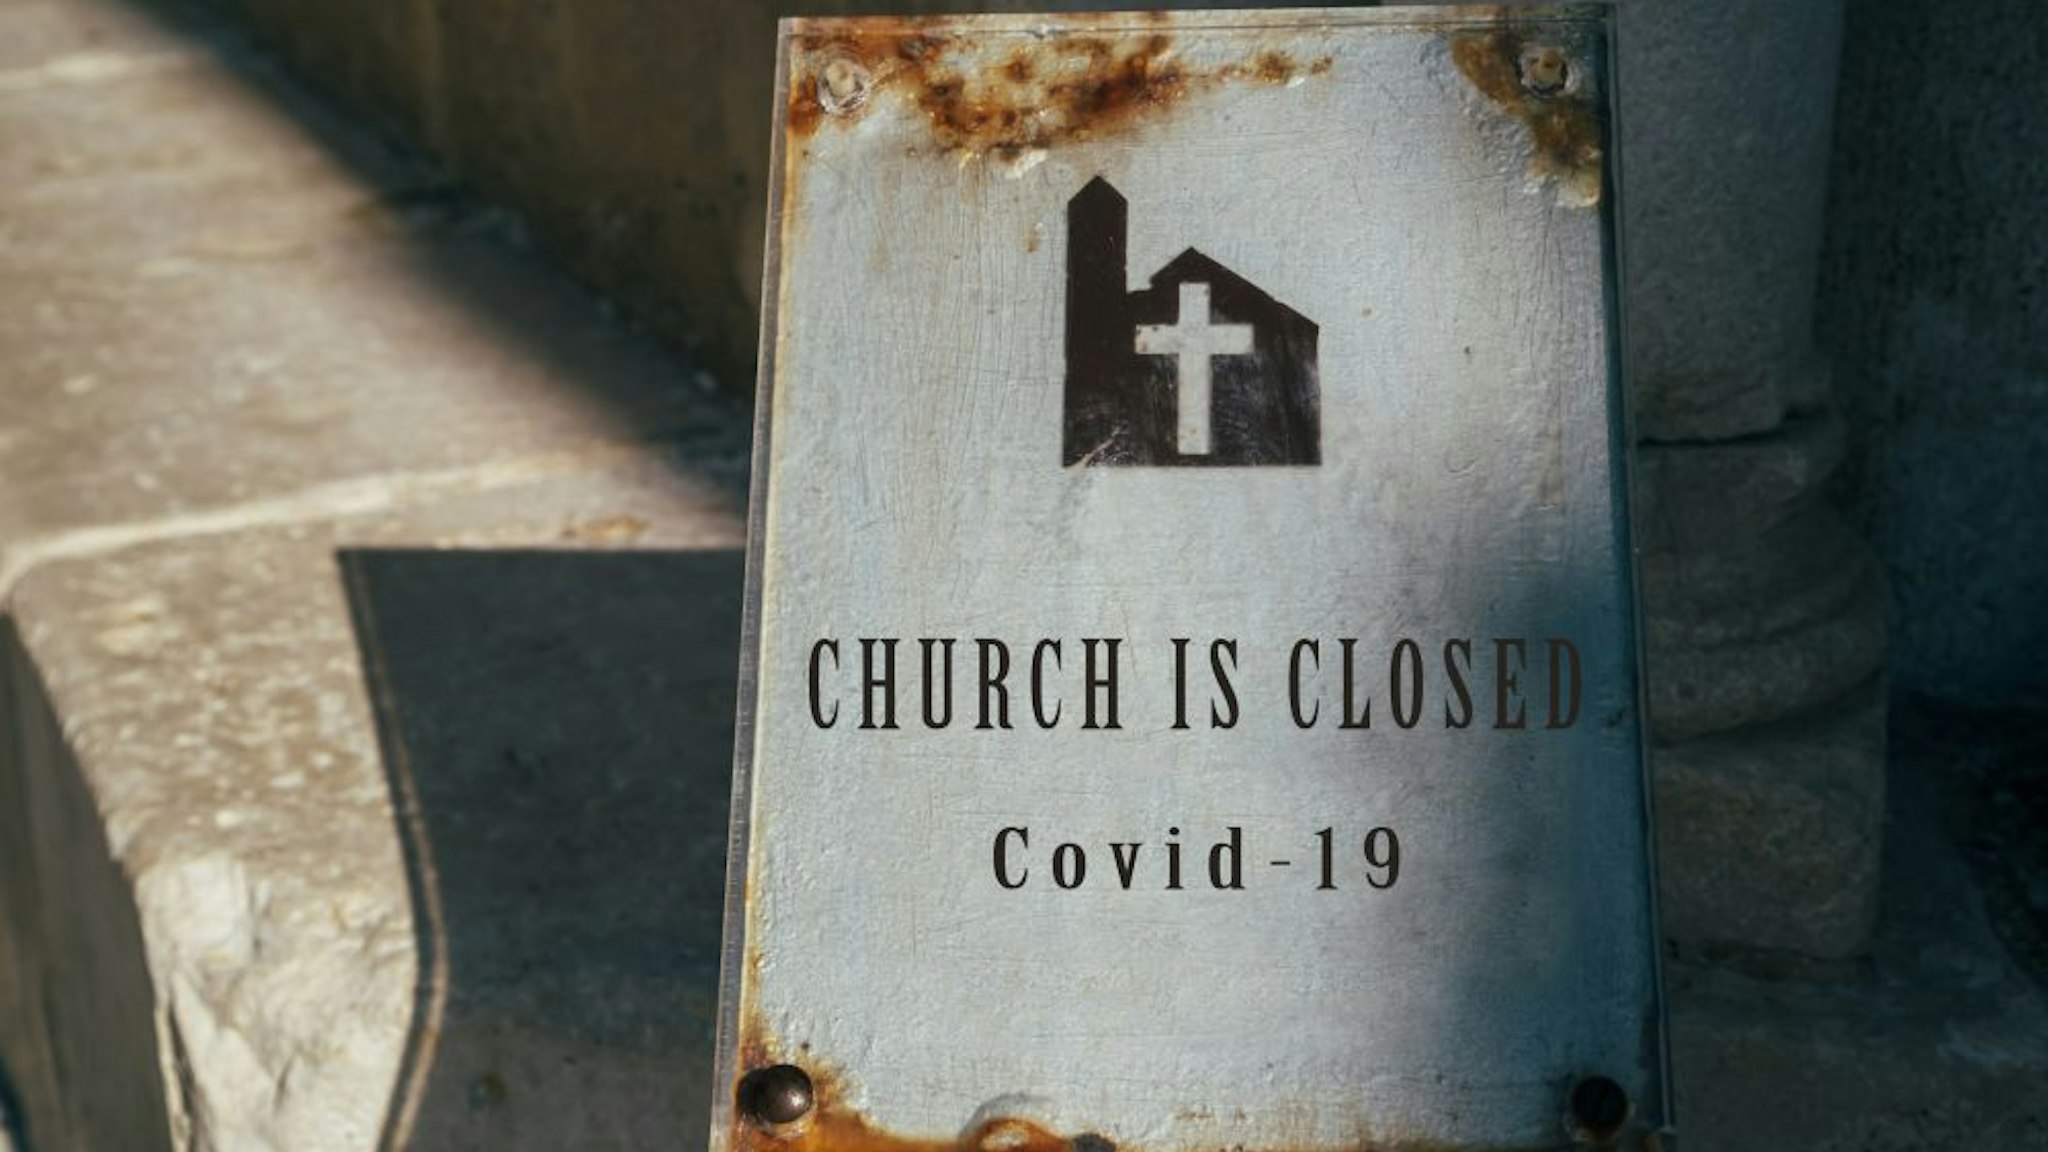 Church is closed sign